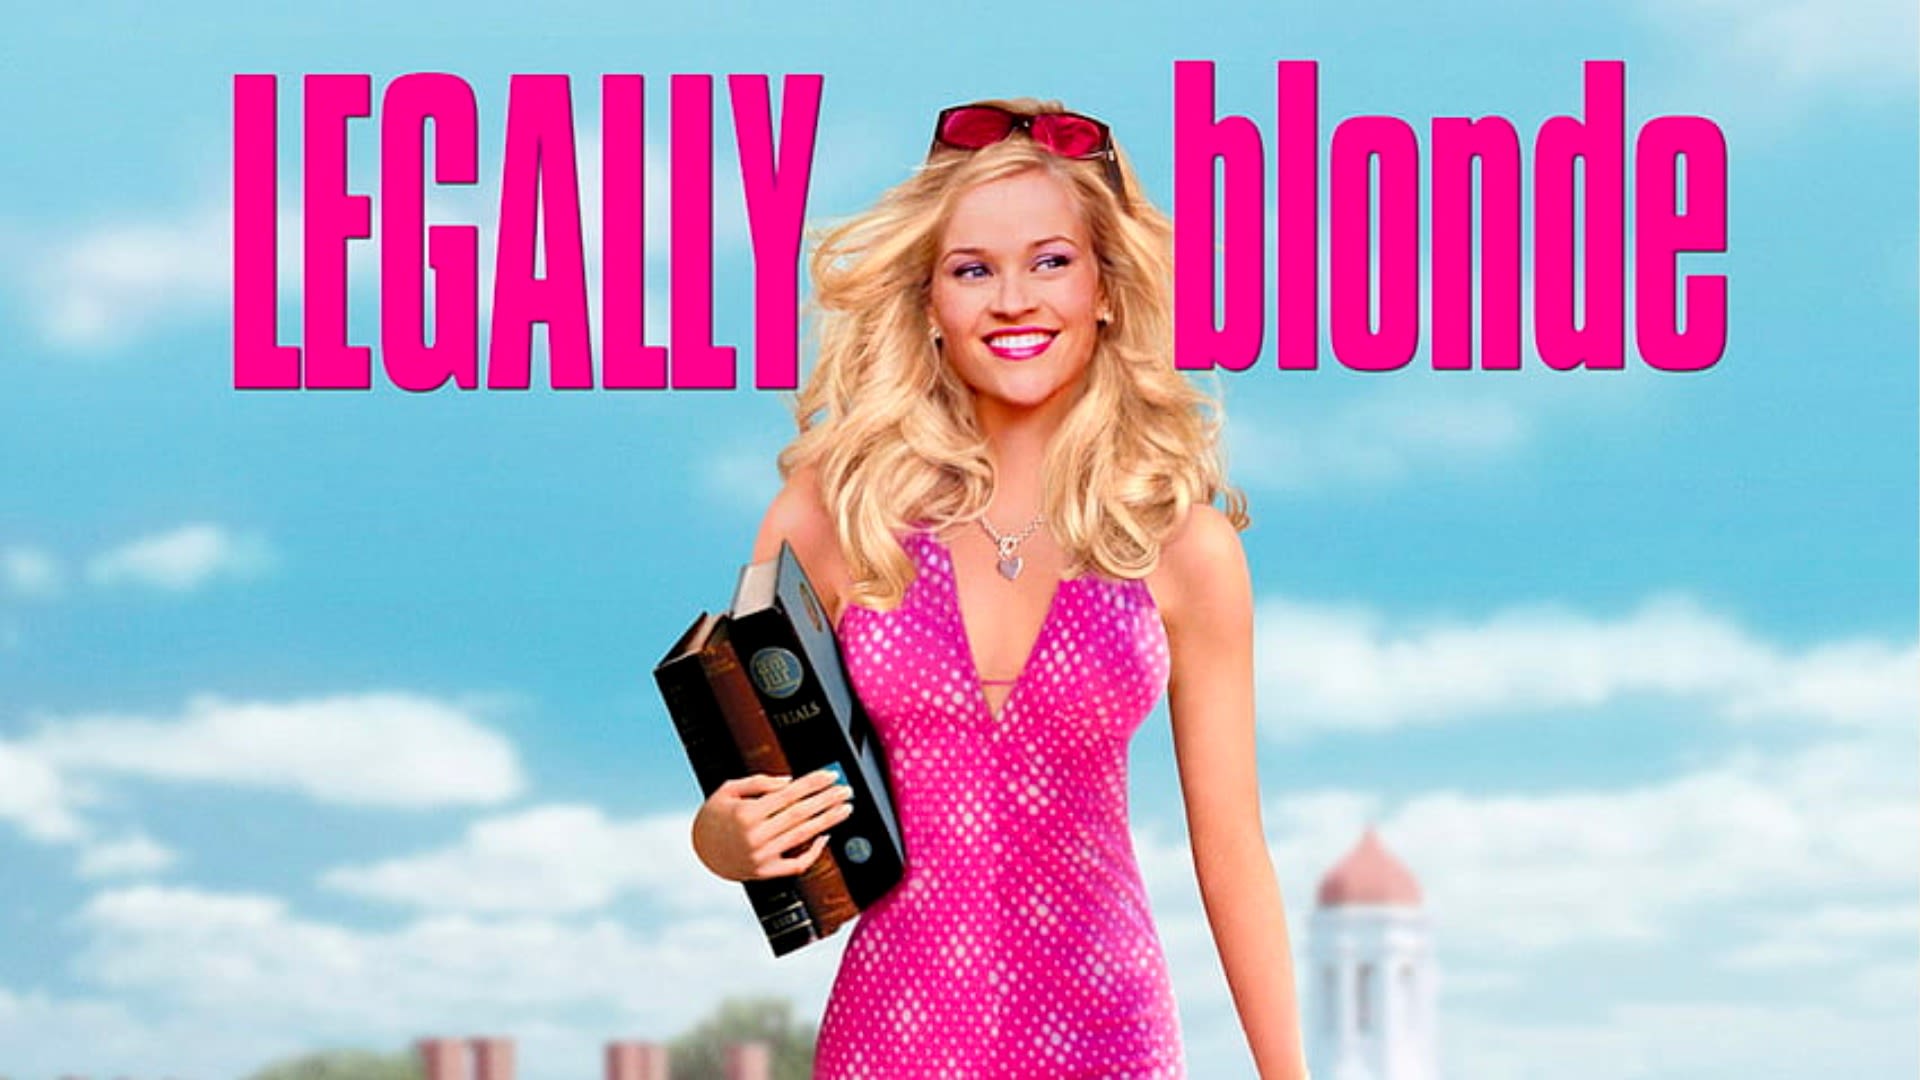 Elle: Prime Video Orders Legally Blonde Prequel Series from Reese Witherspoon Company